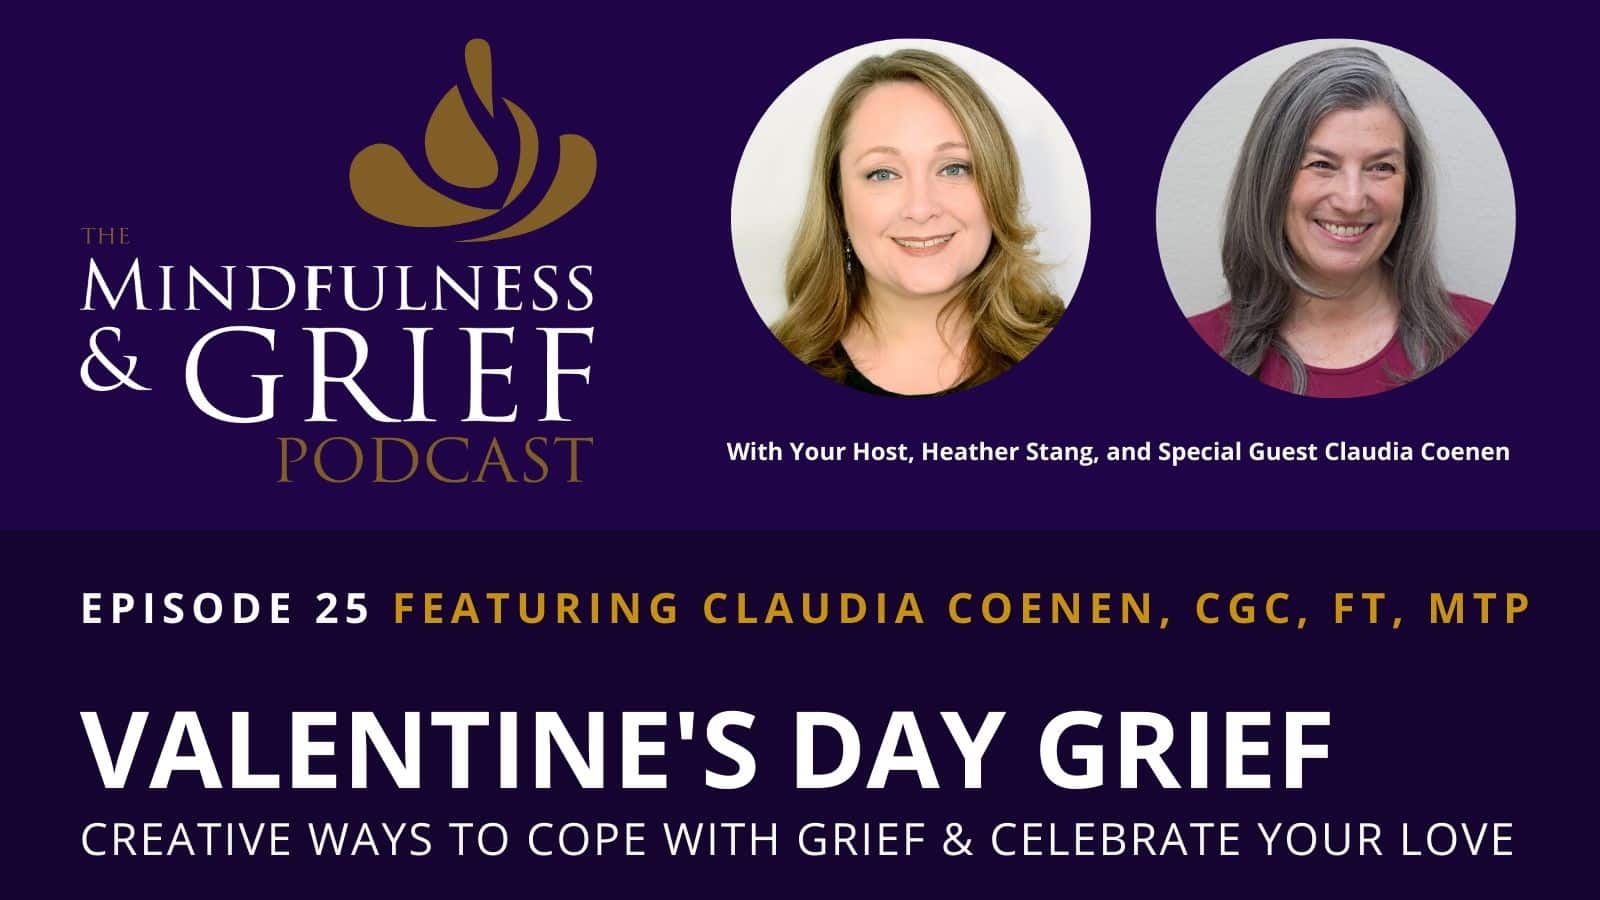 valentines day grief mindfulness grief podcast 25 claudia coenen widescreen